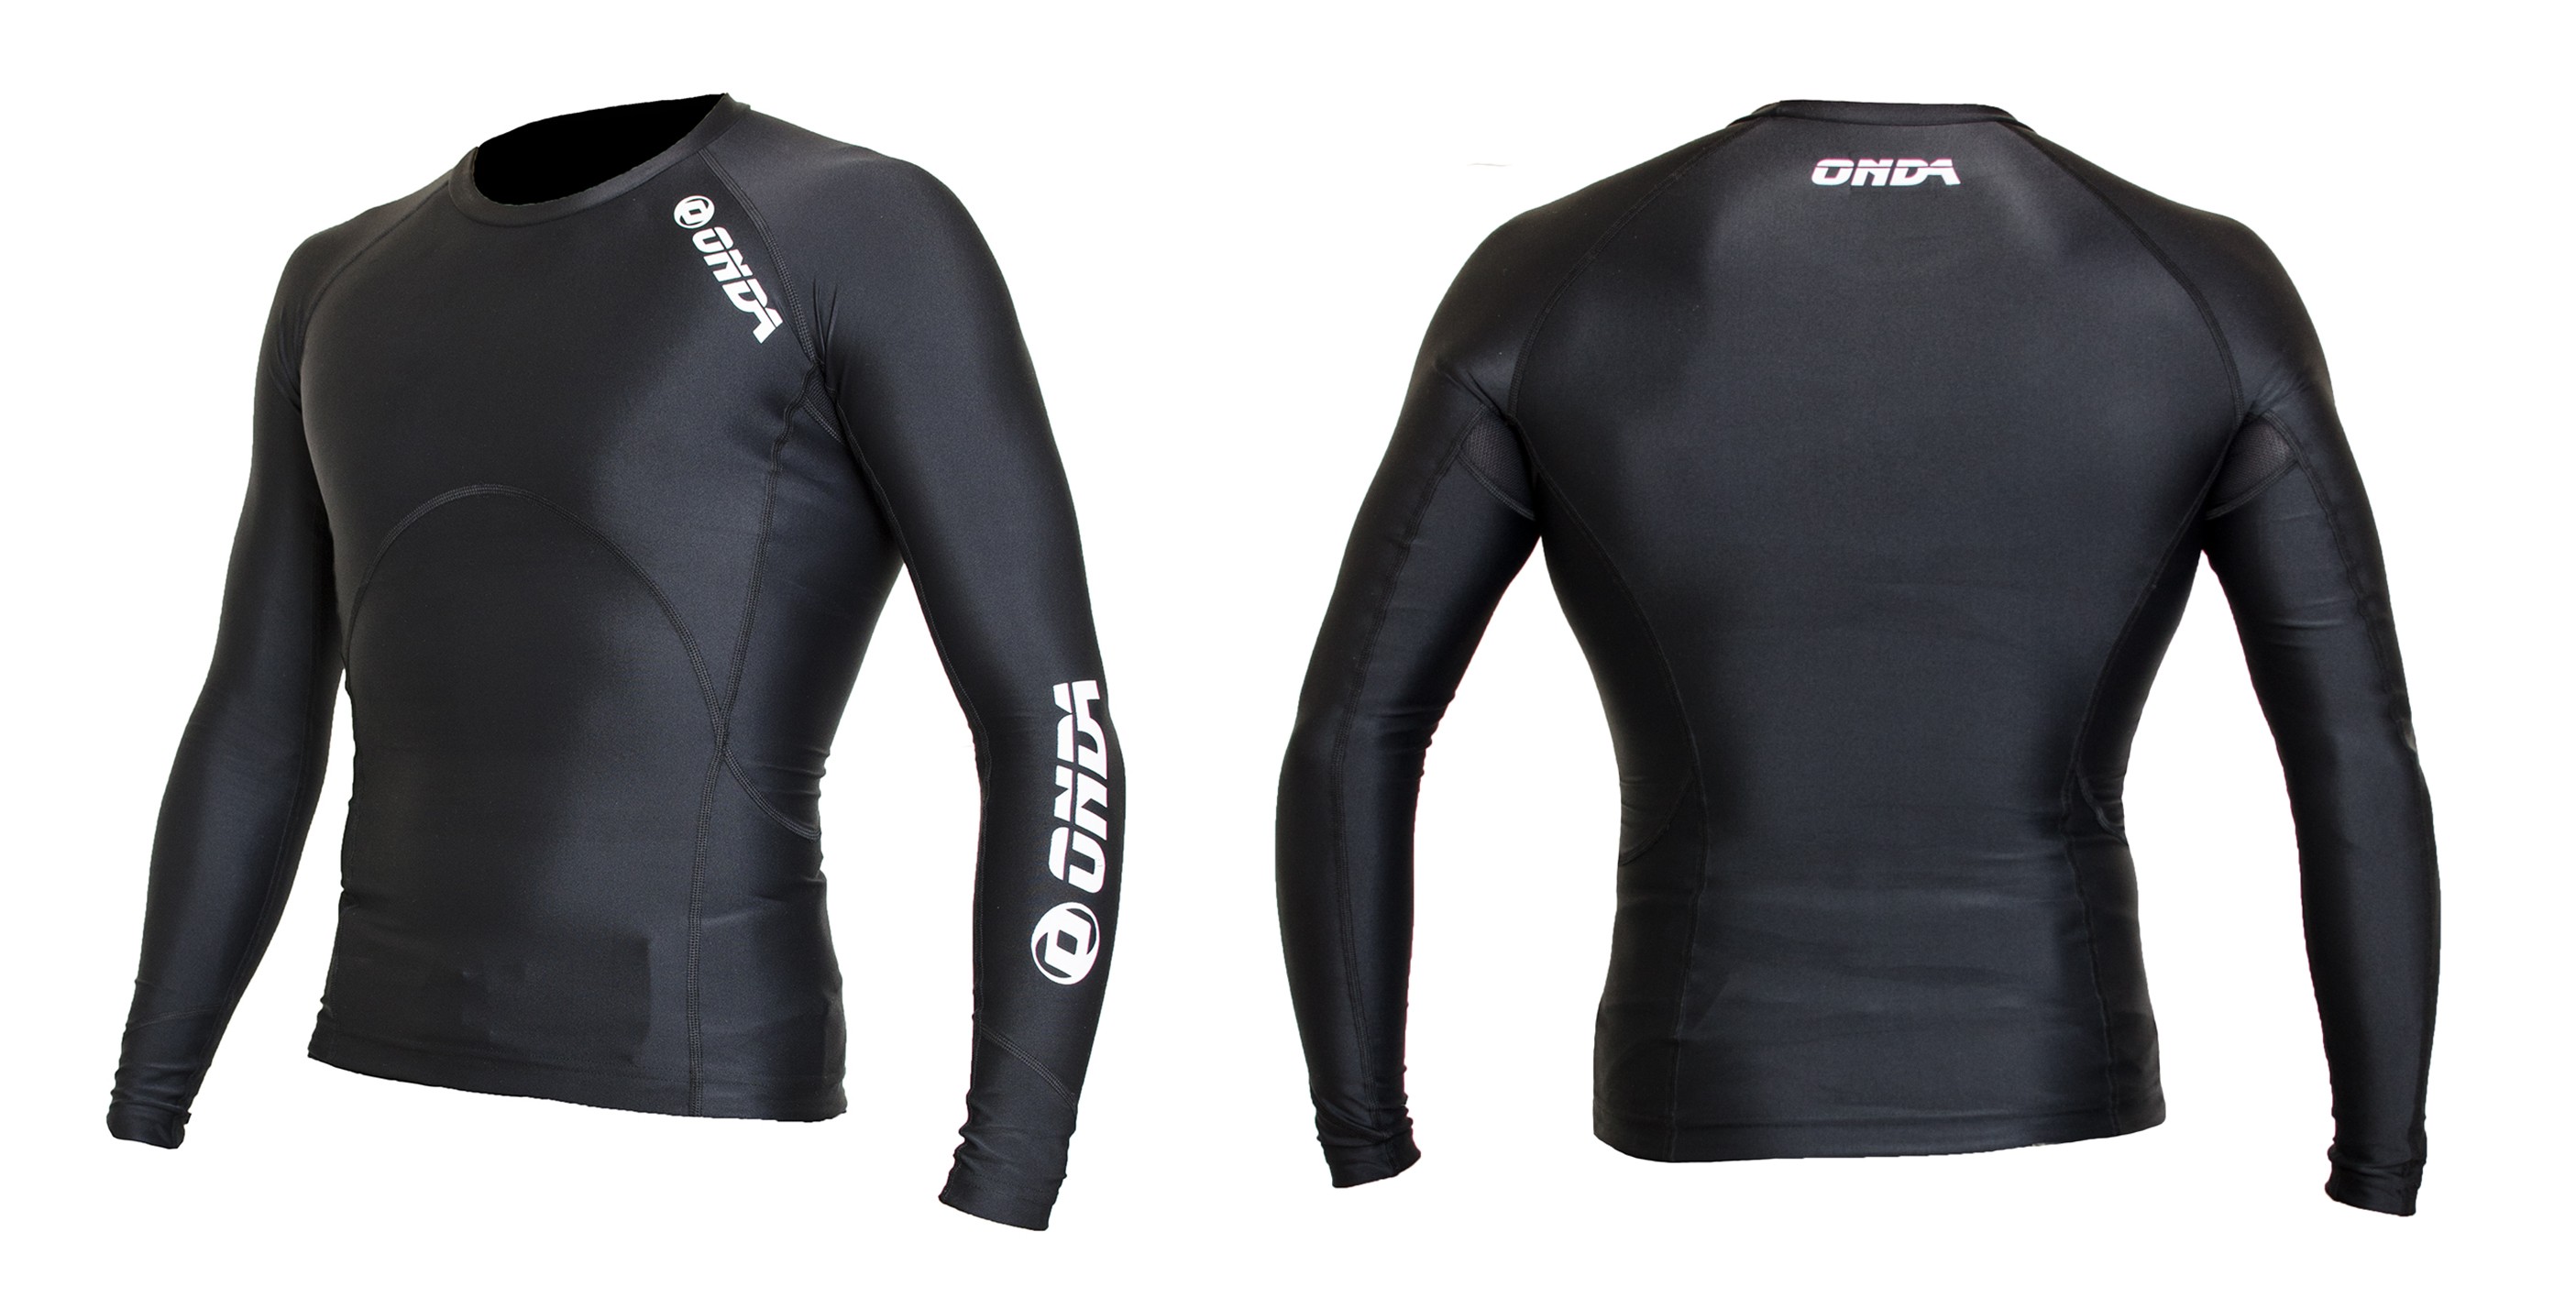 ondawetsuits_compressionseries